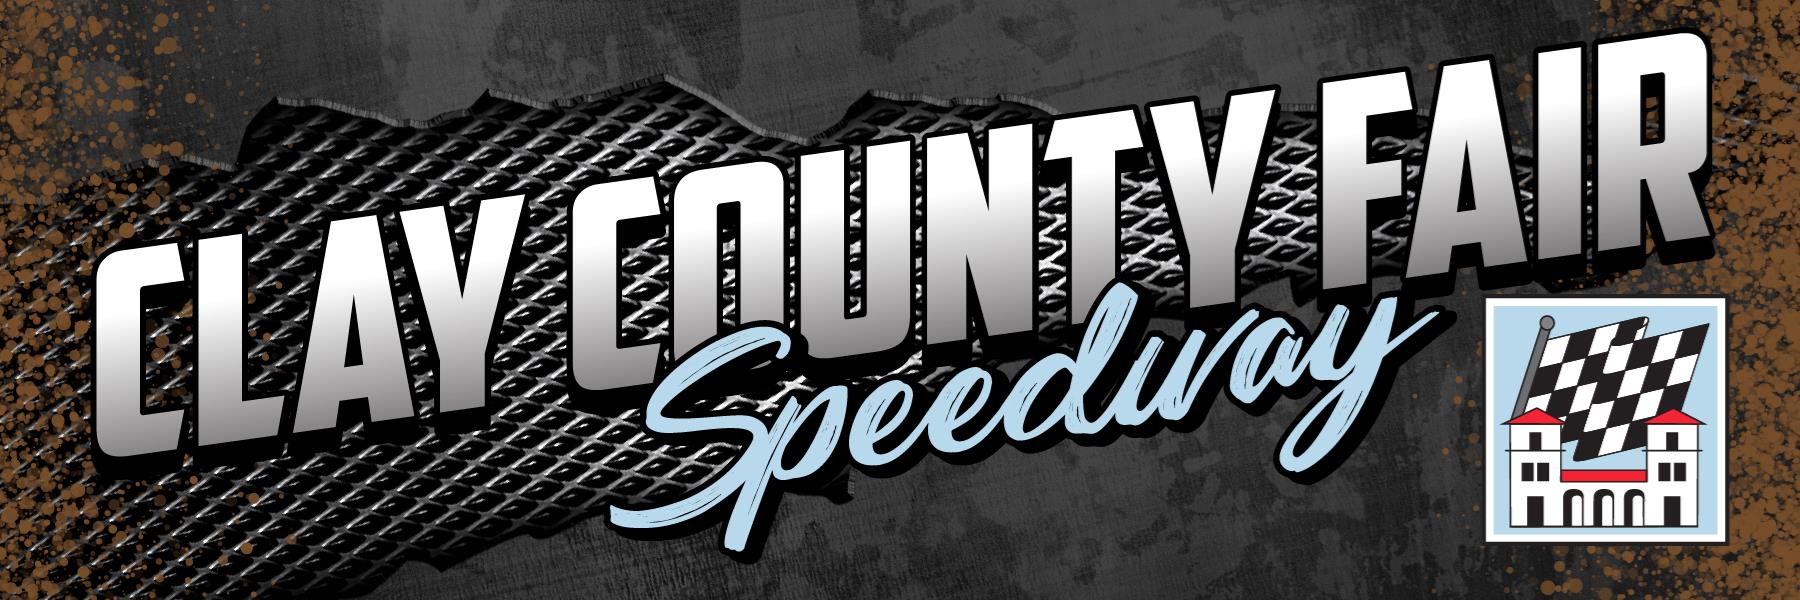 9/13/2022 - Clay County Fair Speedway